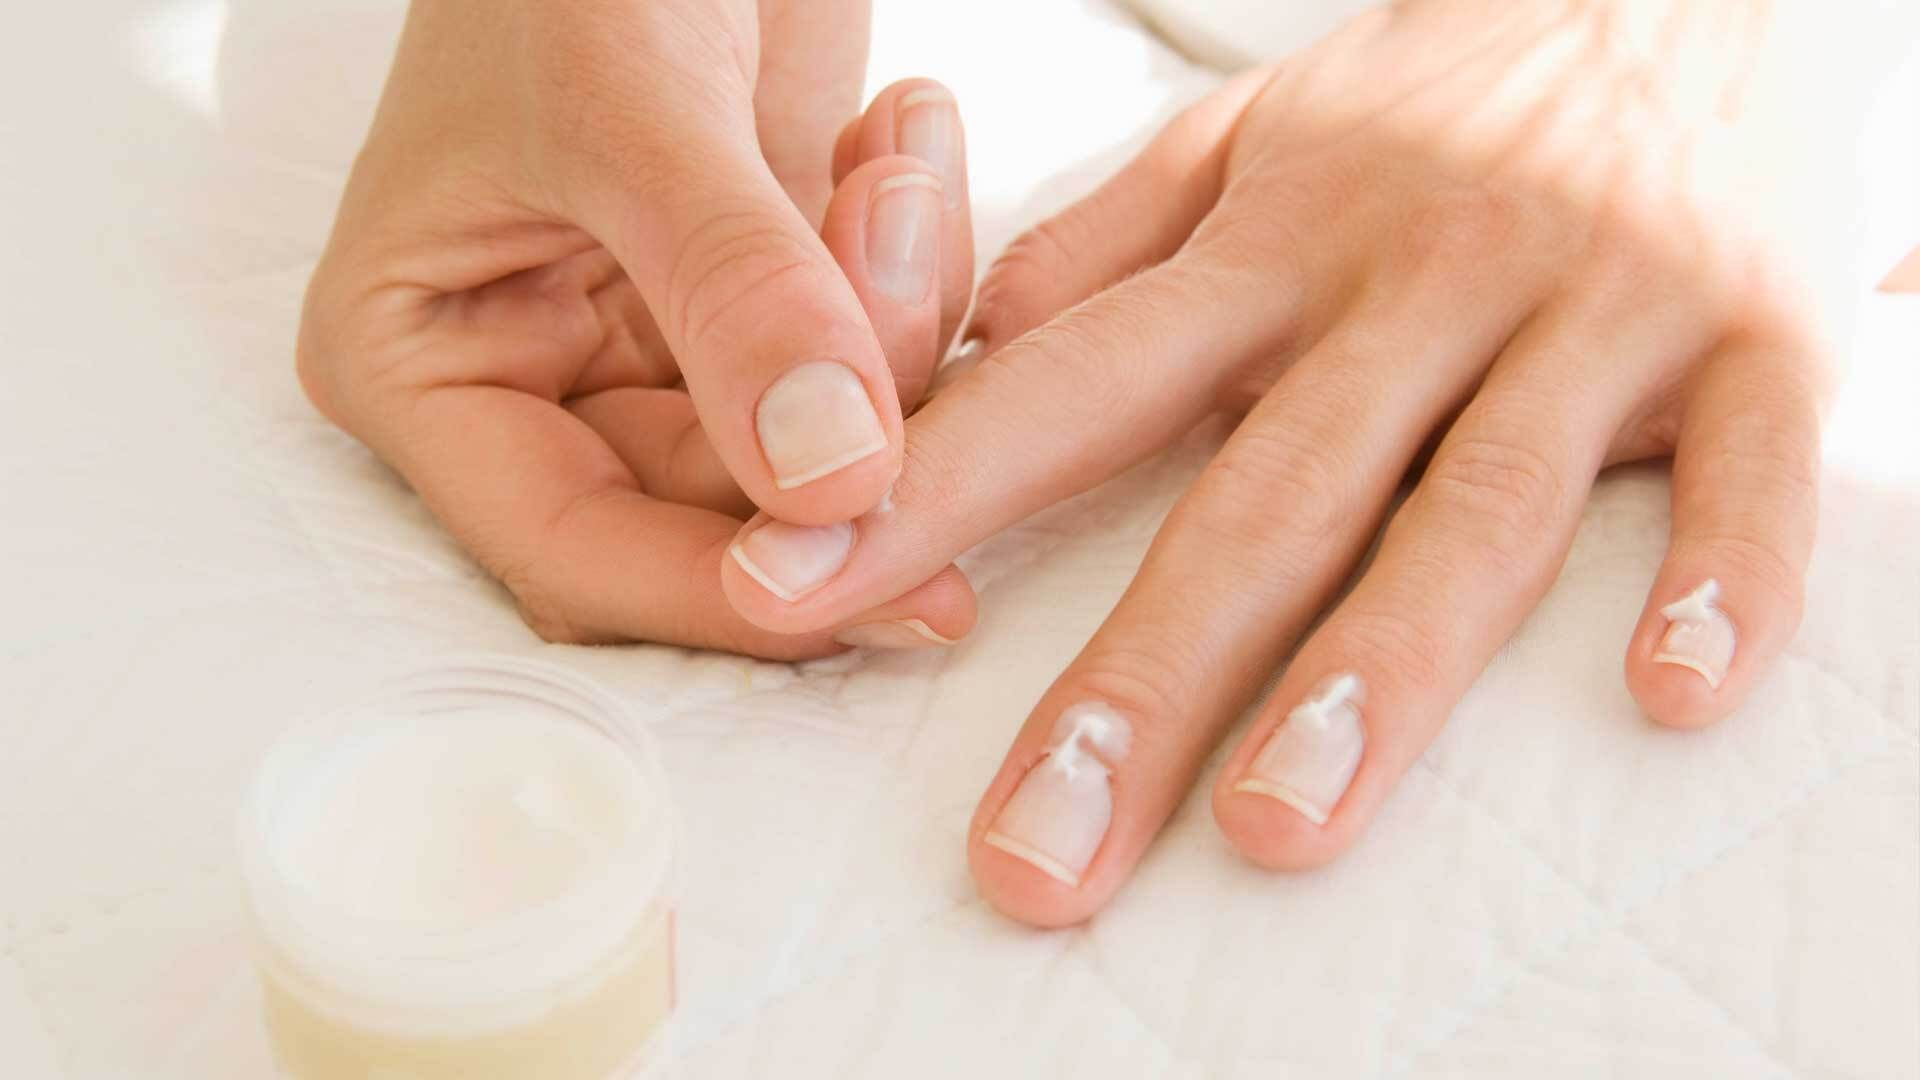 Cracked cuticles? Here come 3 lightning tips against the finger cracks